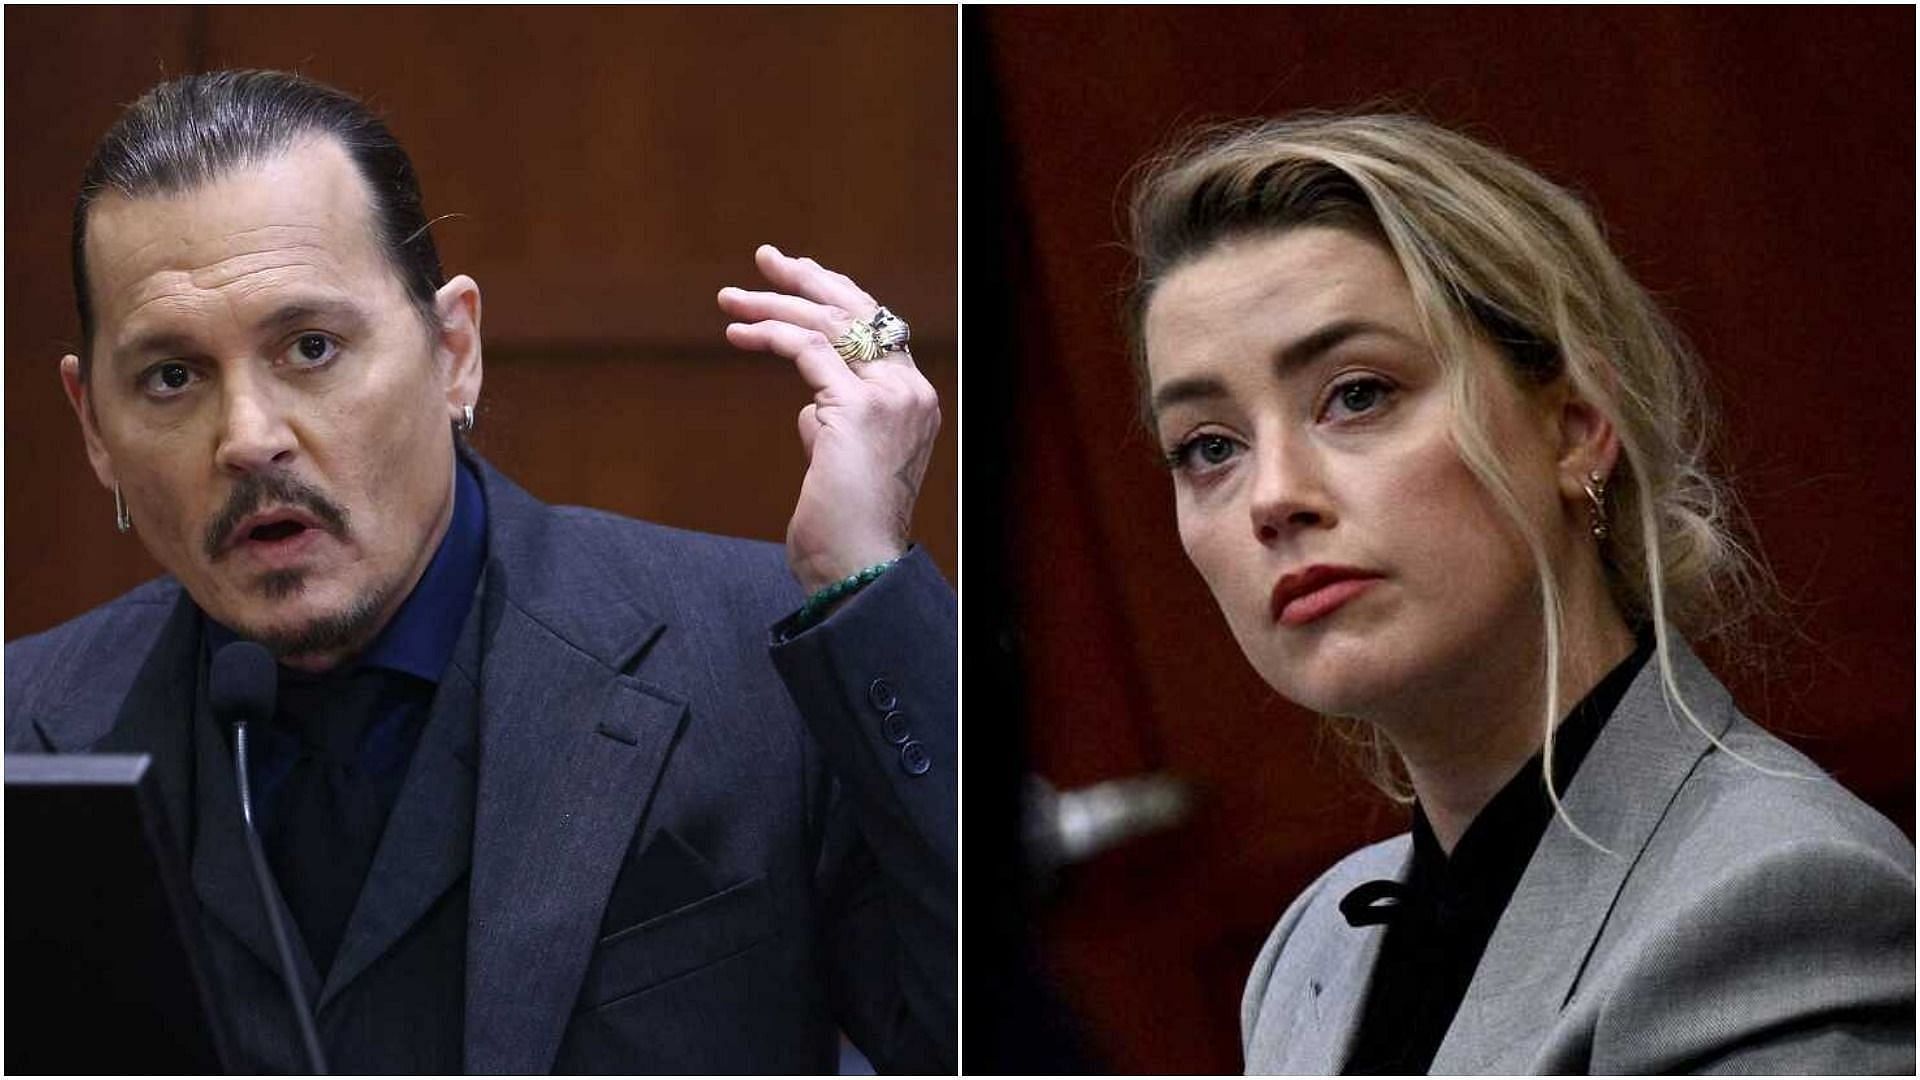 Johnny Depp and Amber Heard in court (Image via Jim Lo Scalzo/AFP/Getty Images and Brendan Smialowski/POOL/AFP/Getty Images)